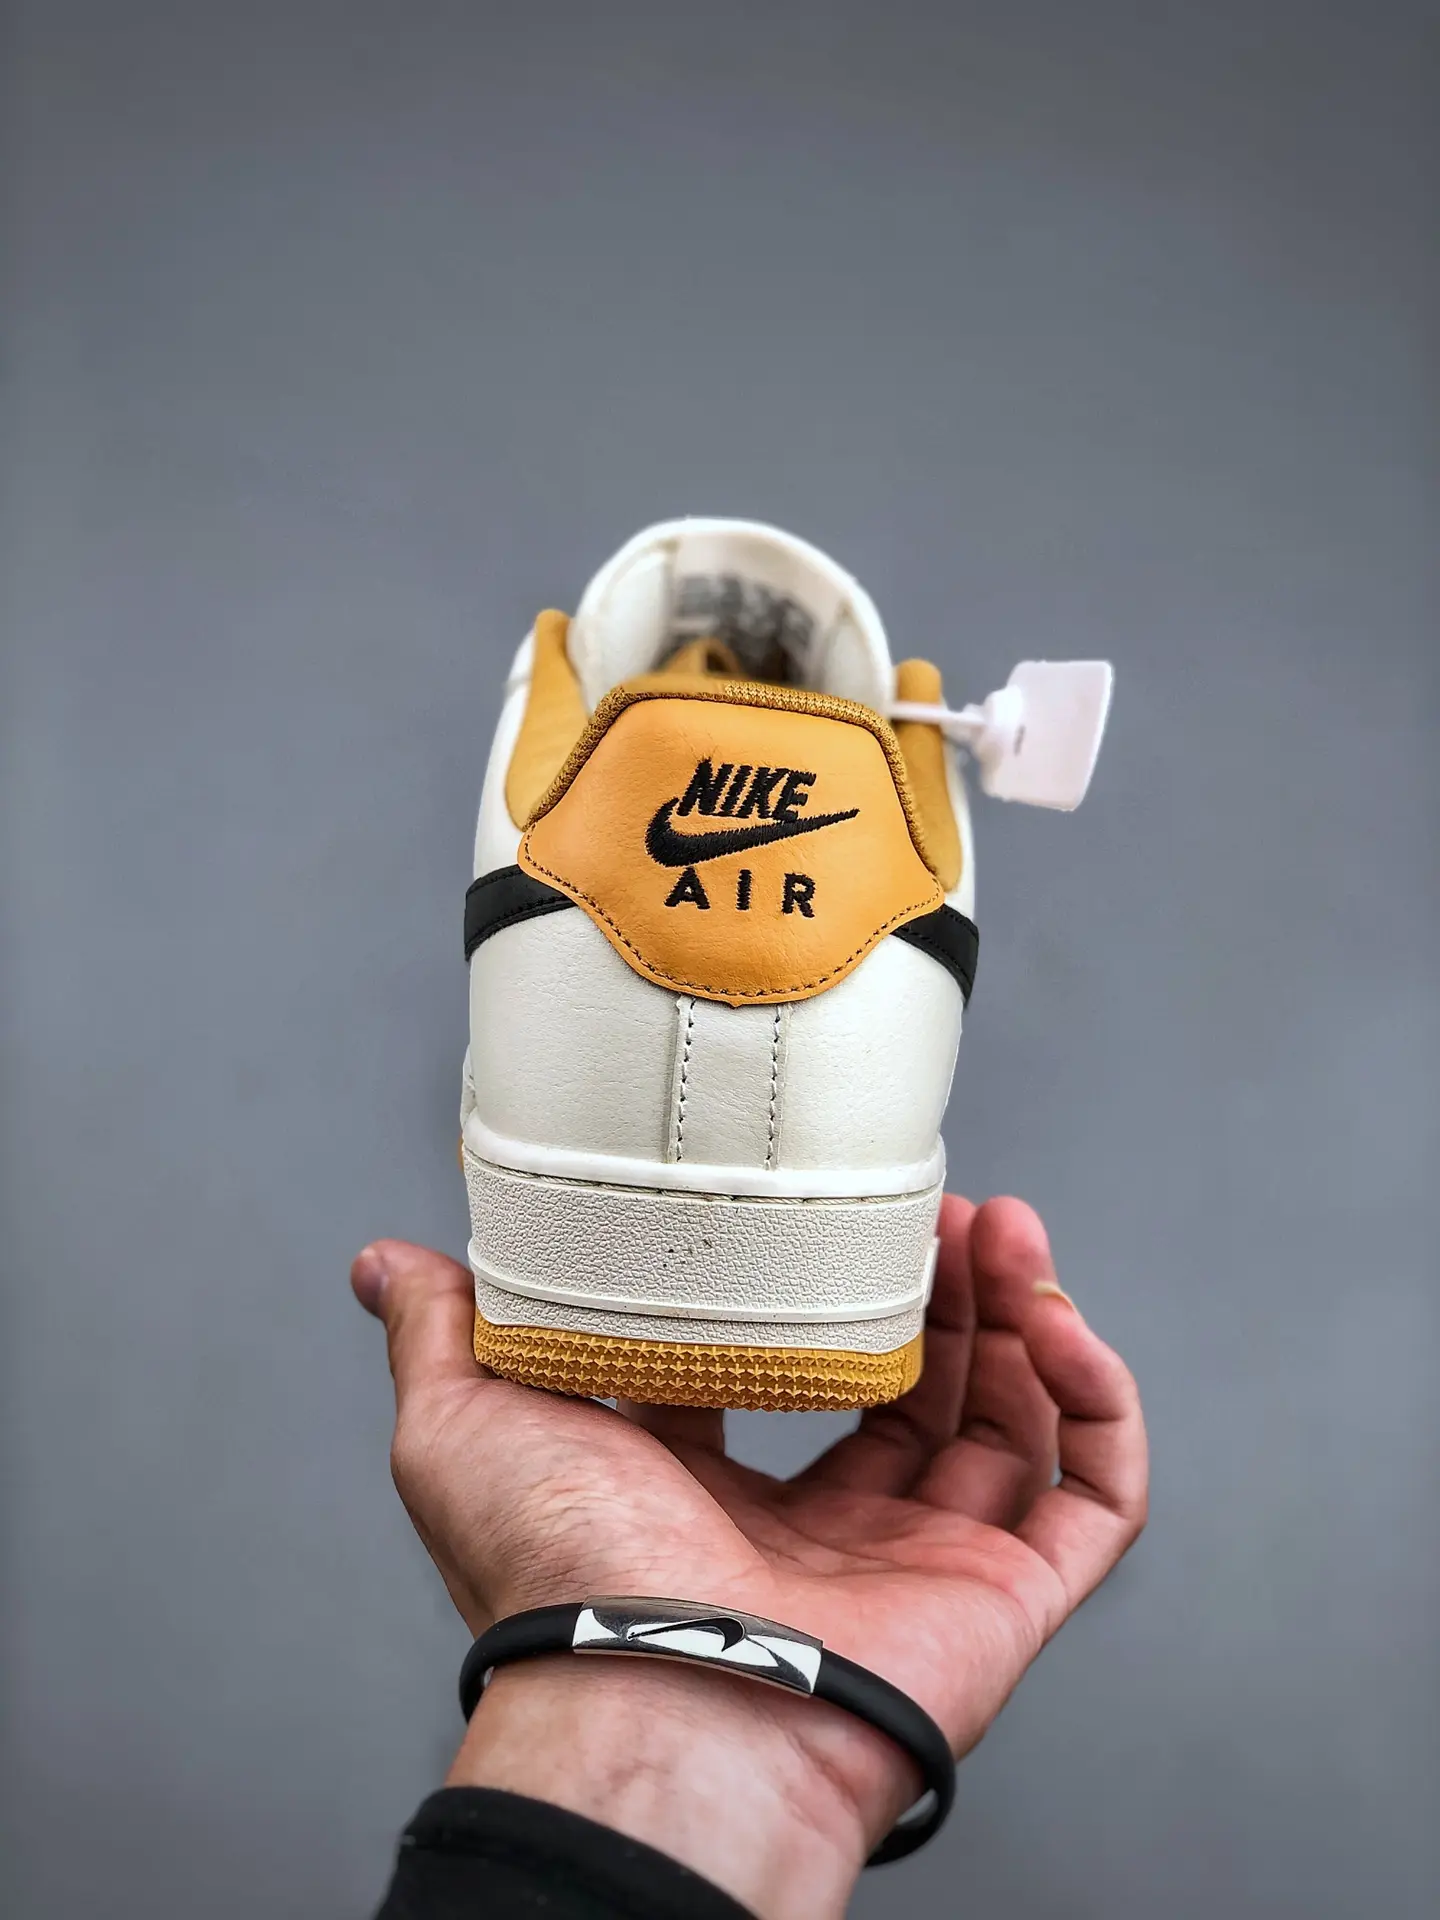 YASSW | Nike Air Force 1 Low Sail Tan Black Shoes Review